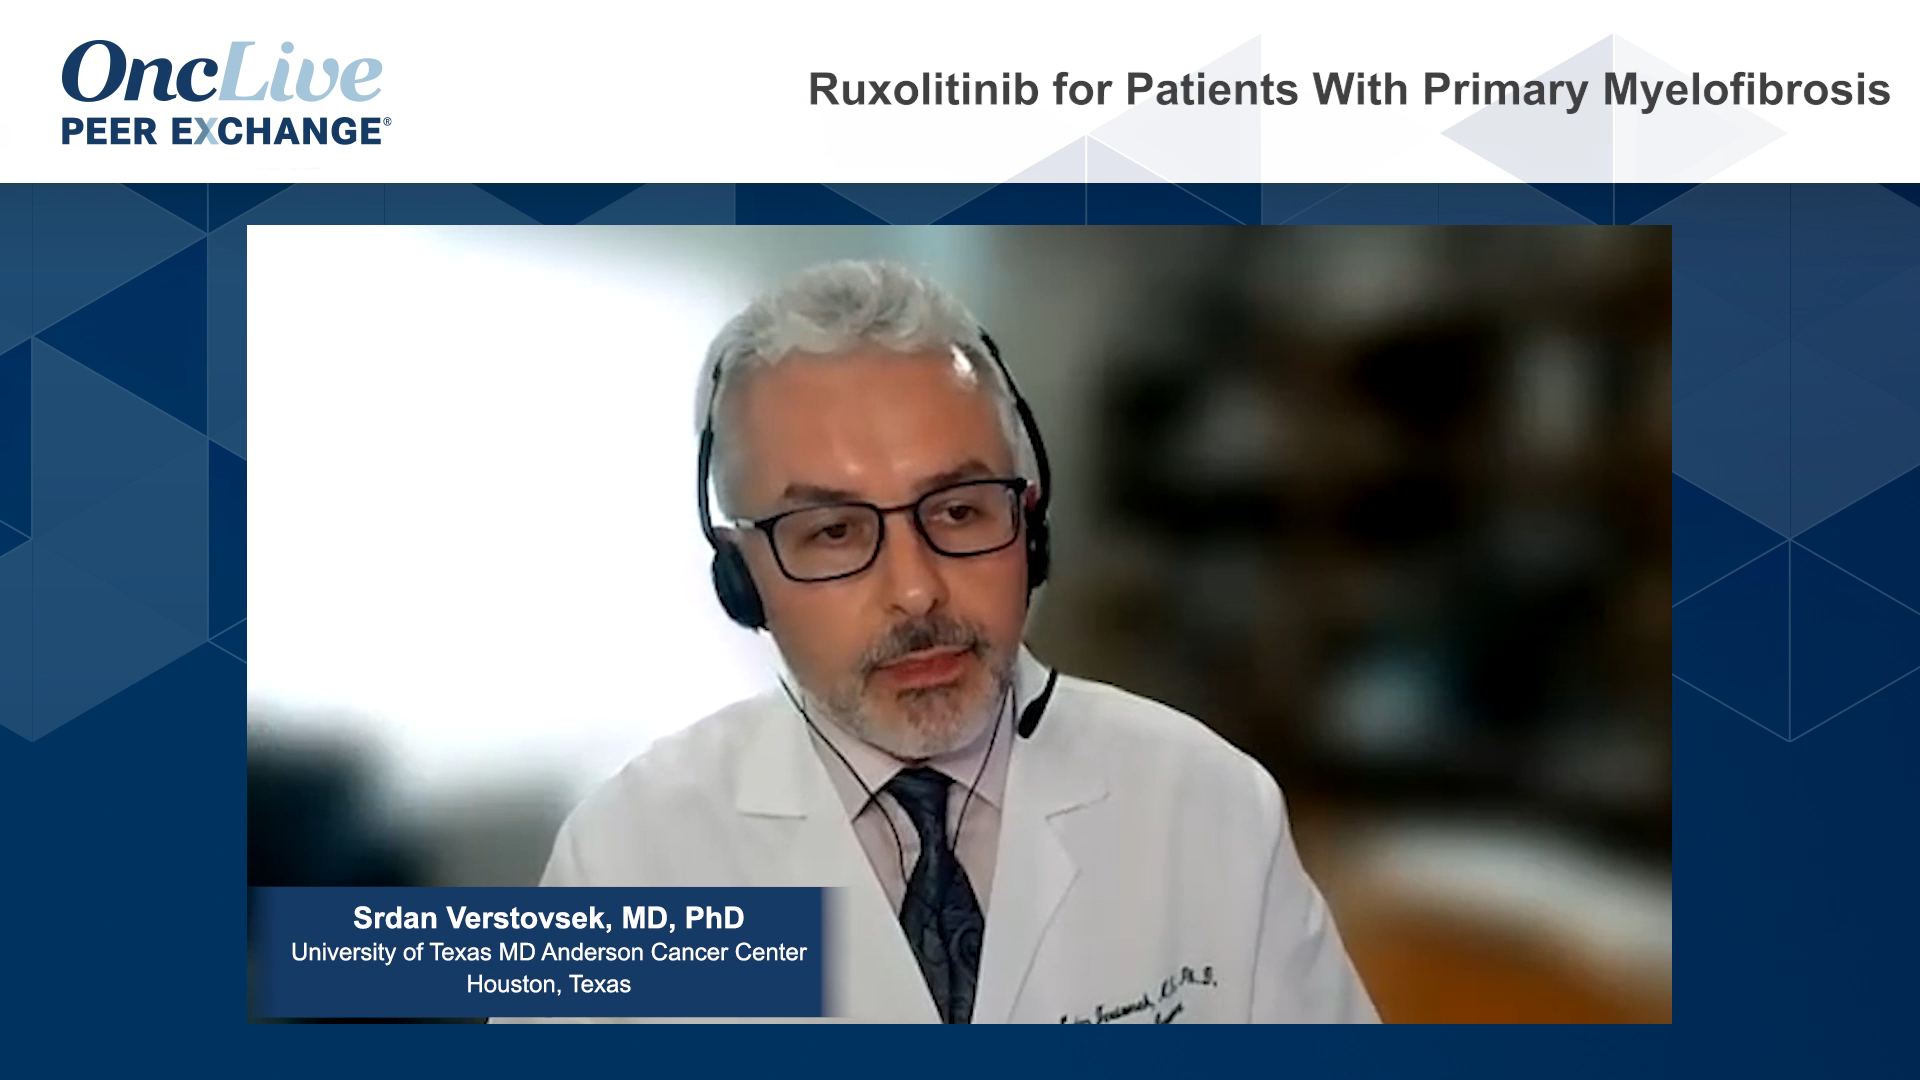 Ruxolitinib for Patients With Primary Myelofibrosis